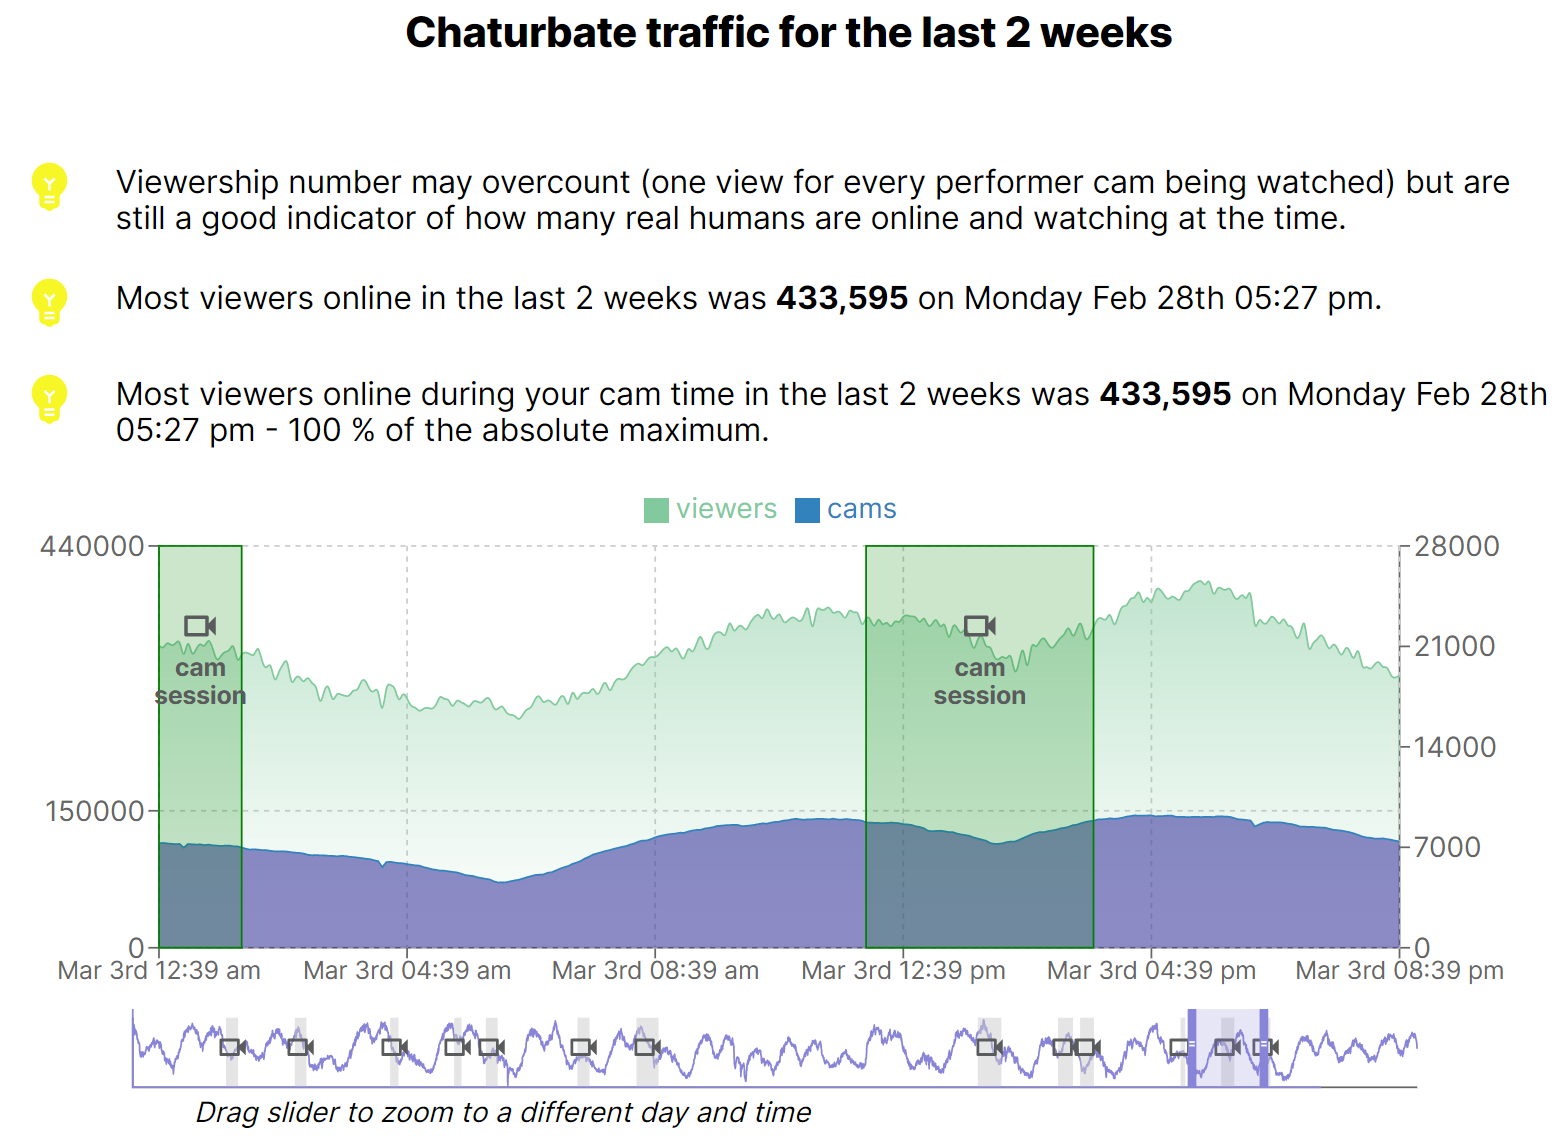 Chaturbate traffic for the last 2 weeks